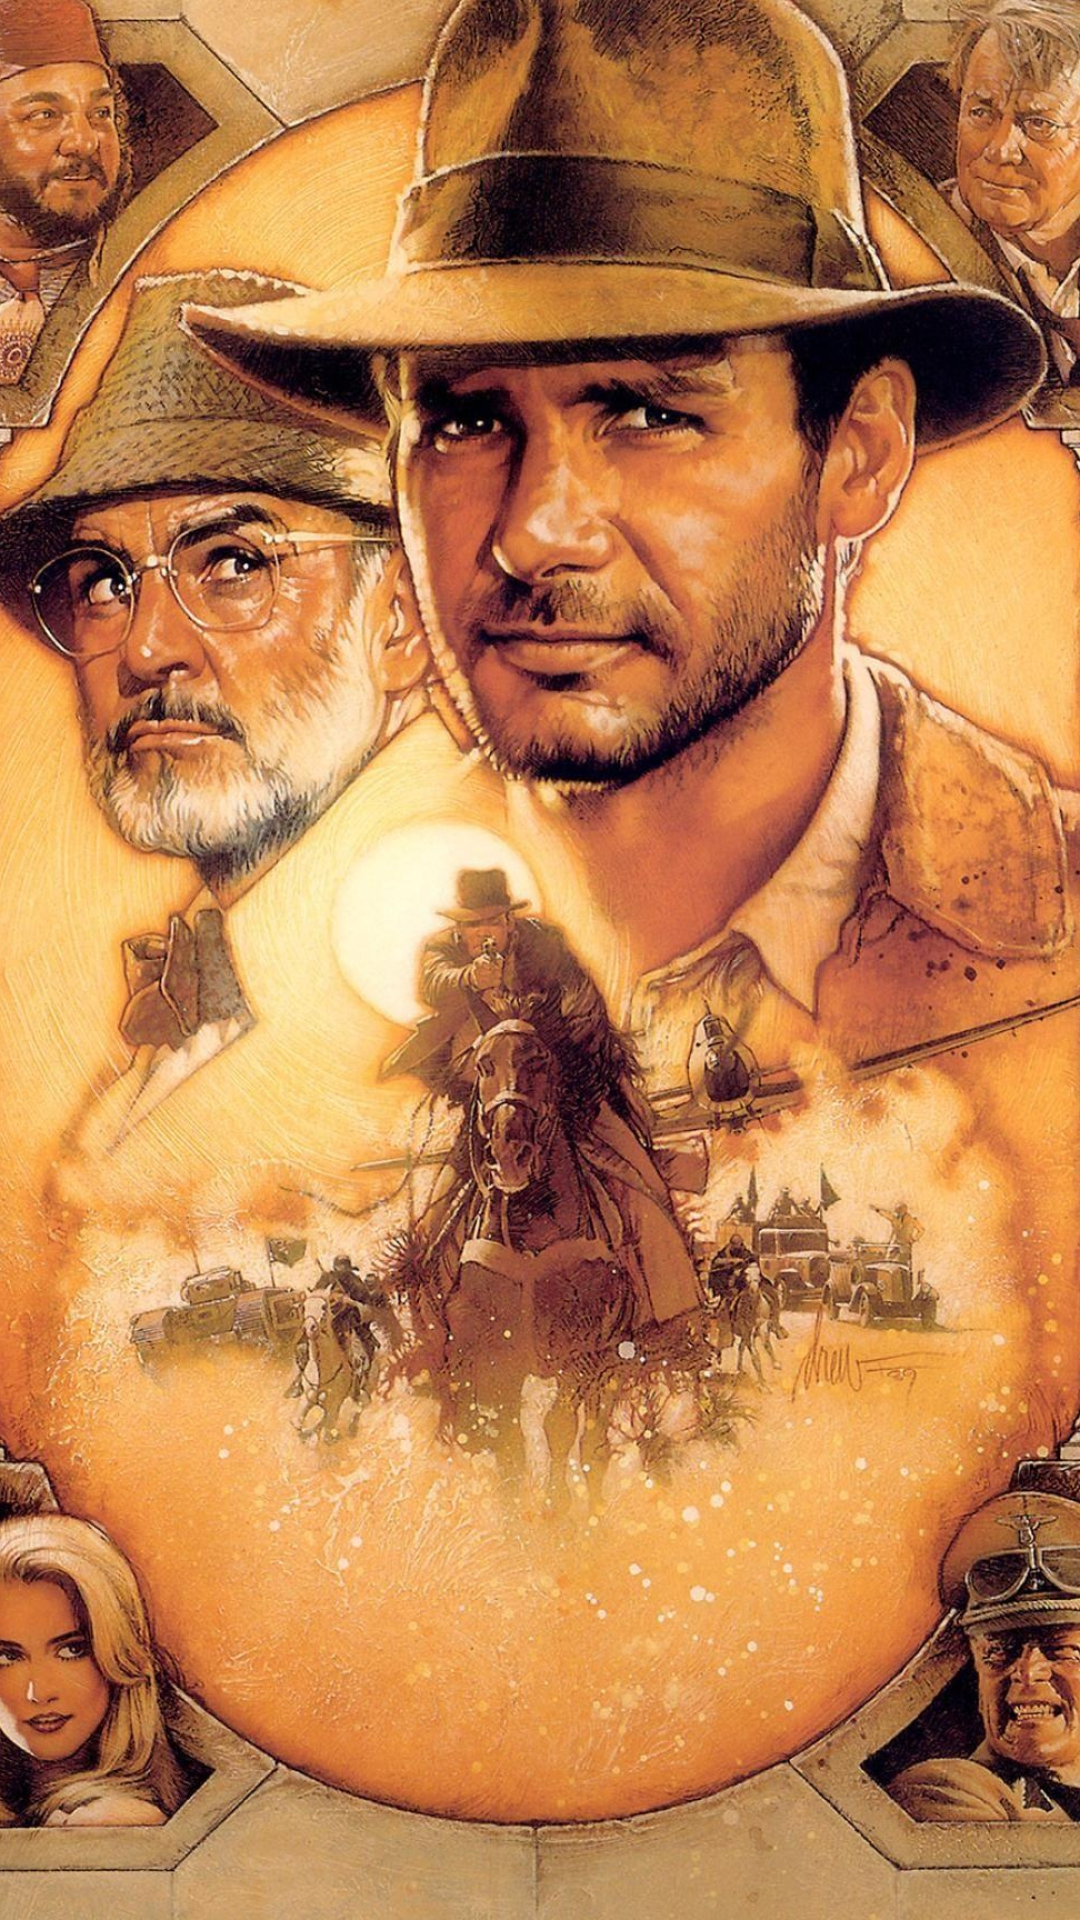 Harrison Ford (Indiana Jones): The third installment in the IJ franchise and a sequel to Raiders of the Lost Ark, 1981. 1080x1920 Full HD Wallpaper.